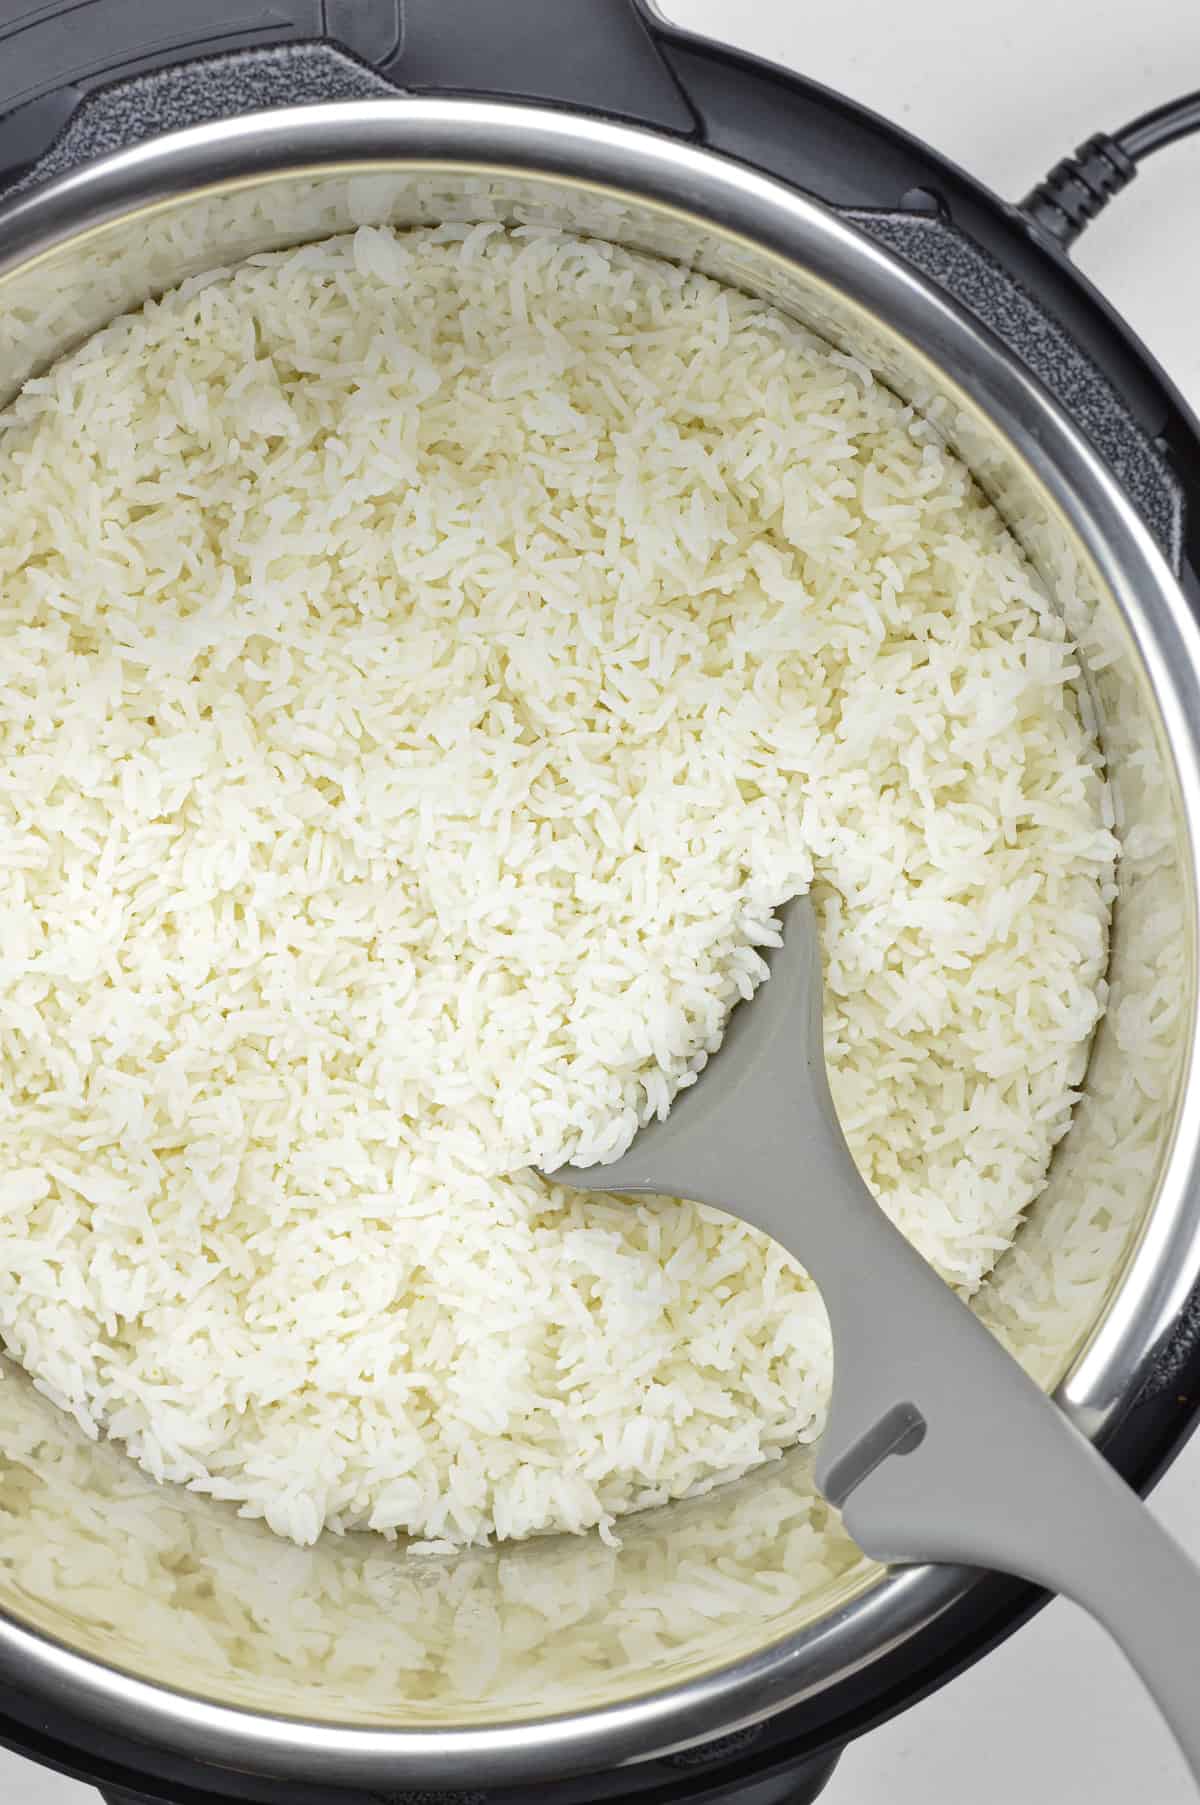 How Long Do I Cook Rice In An Electric Pressure Cooker